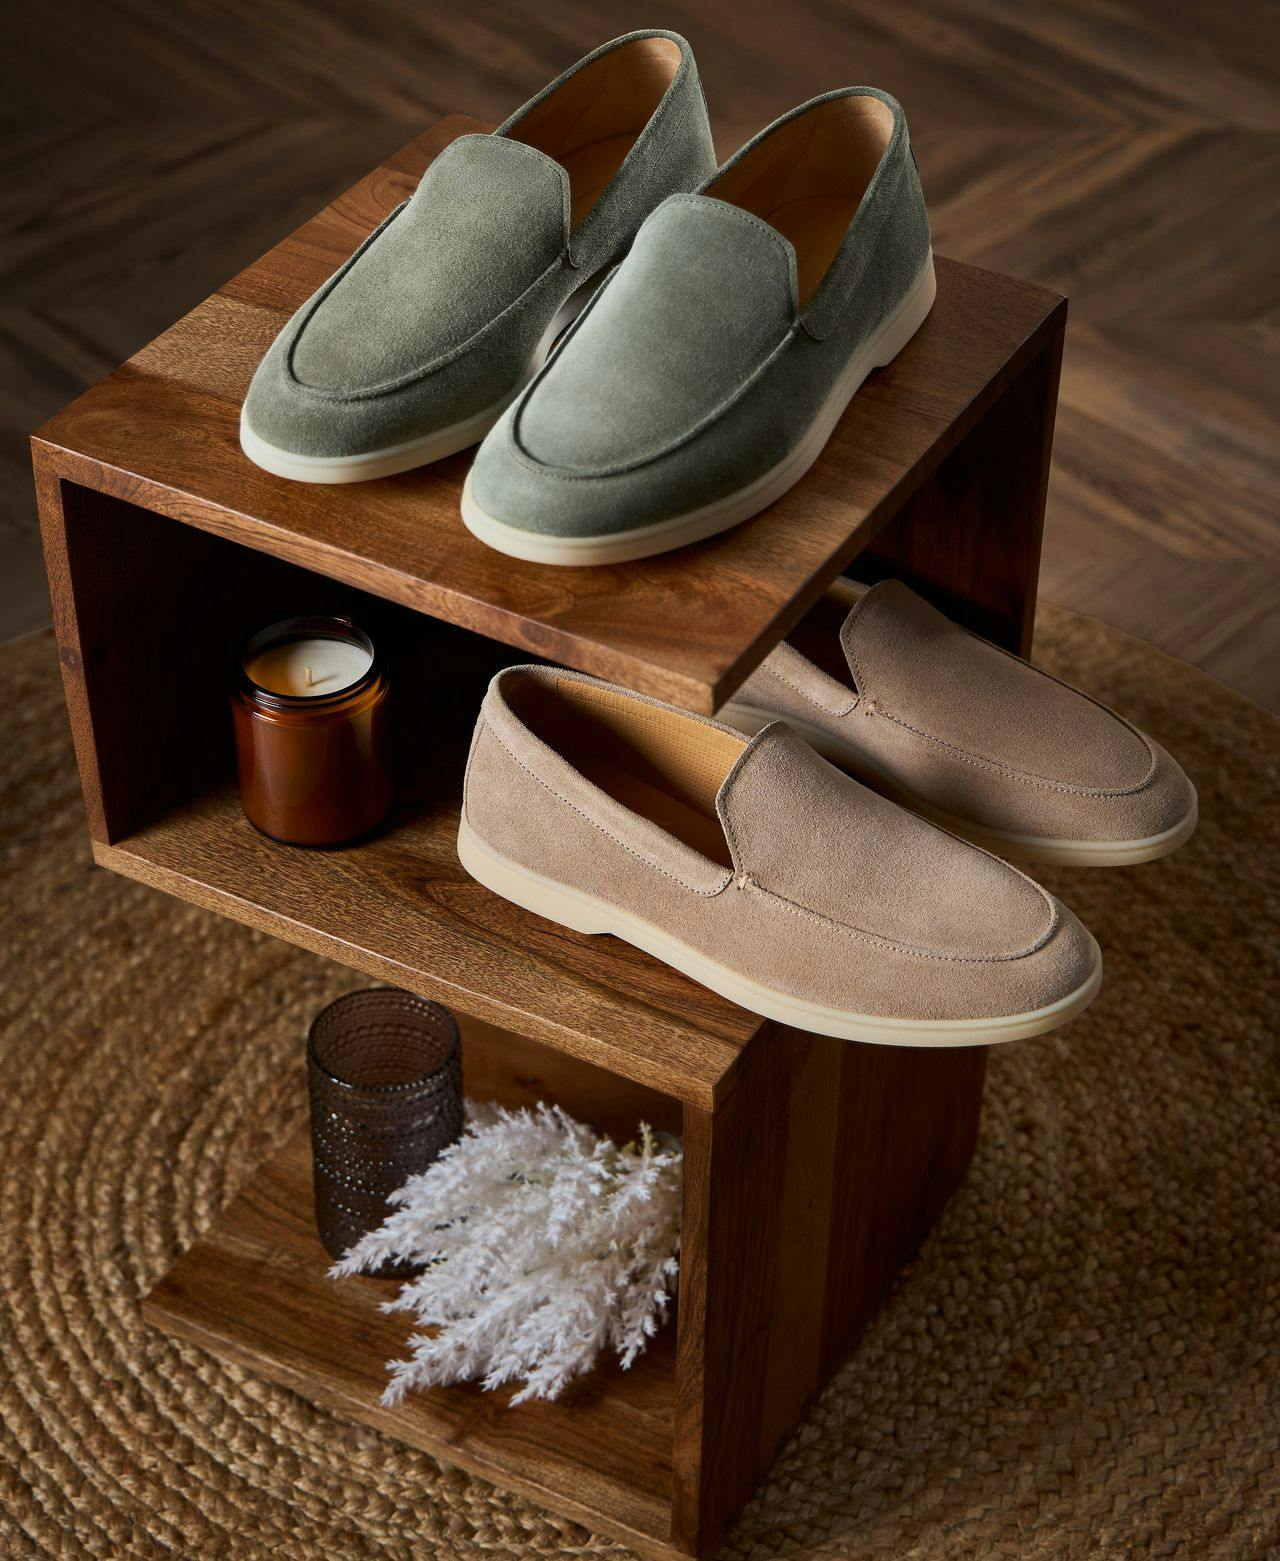 two pairs of loafers and two candles displayed on shelves ontop of carpet